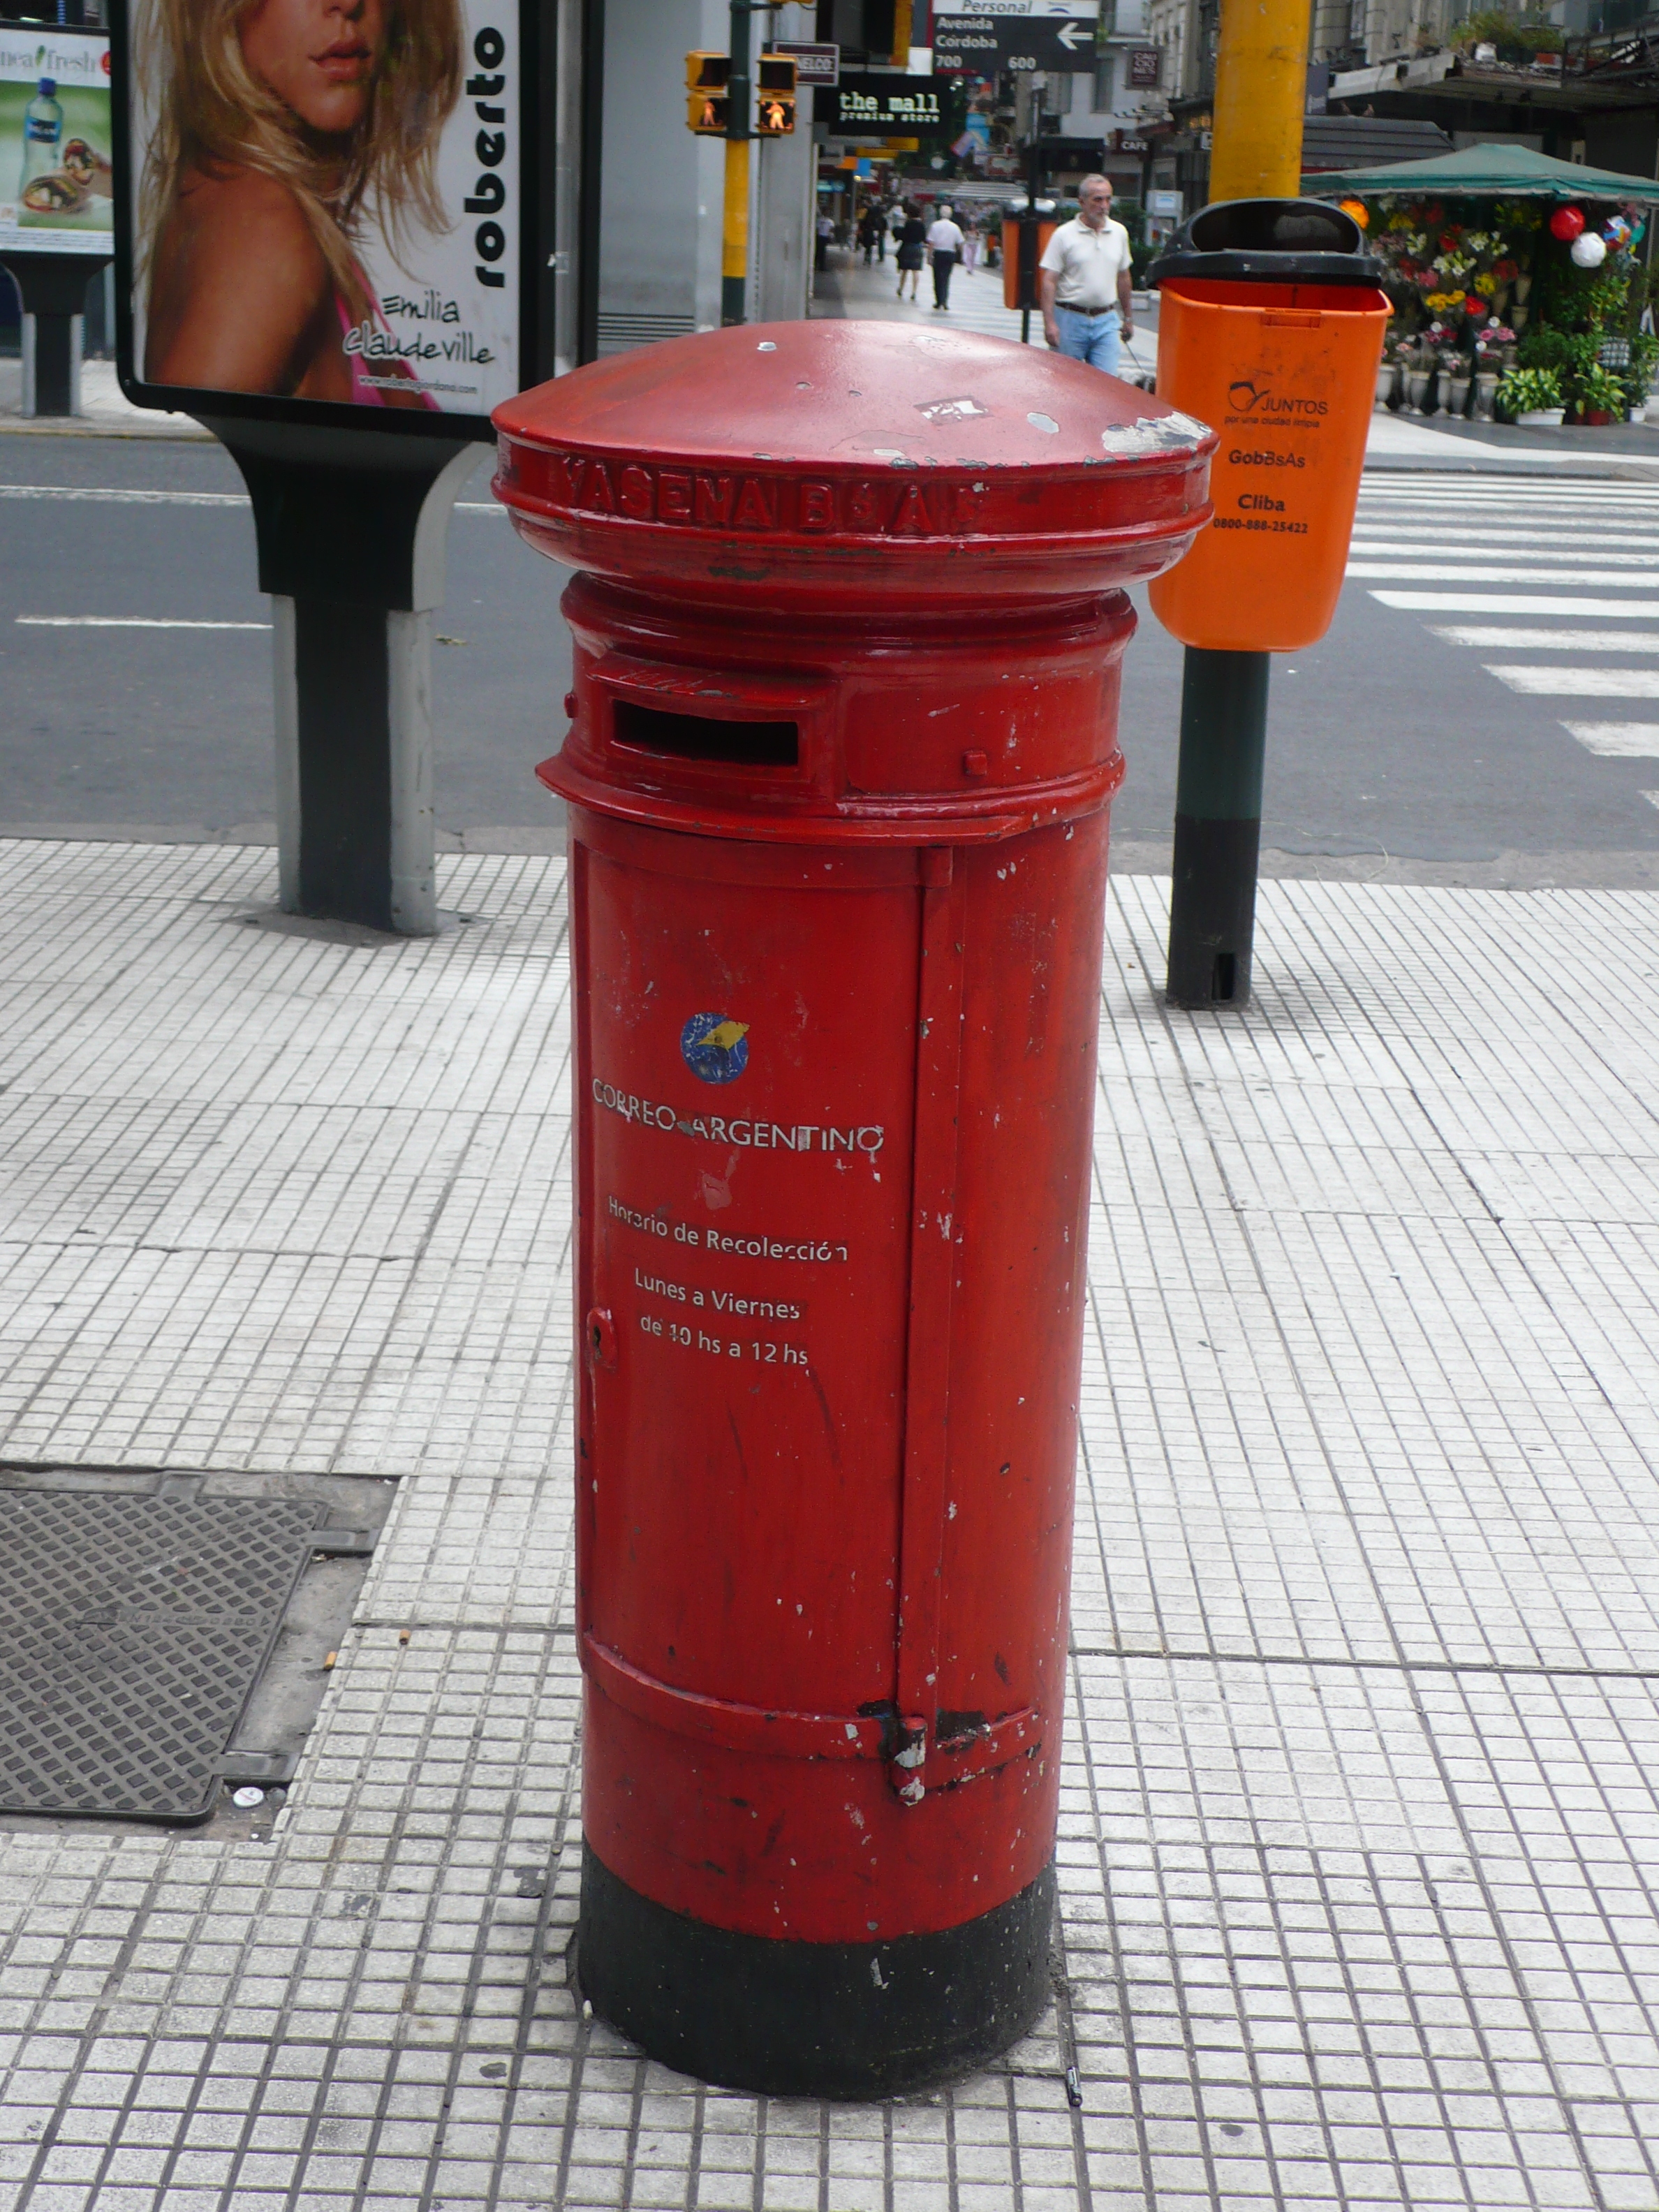 File:Red mail drop box Buenos Aires.jpg - Wikimedia Commons